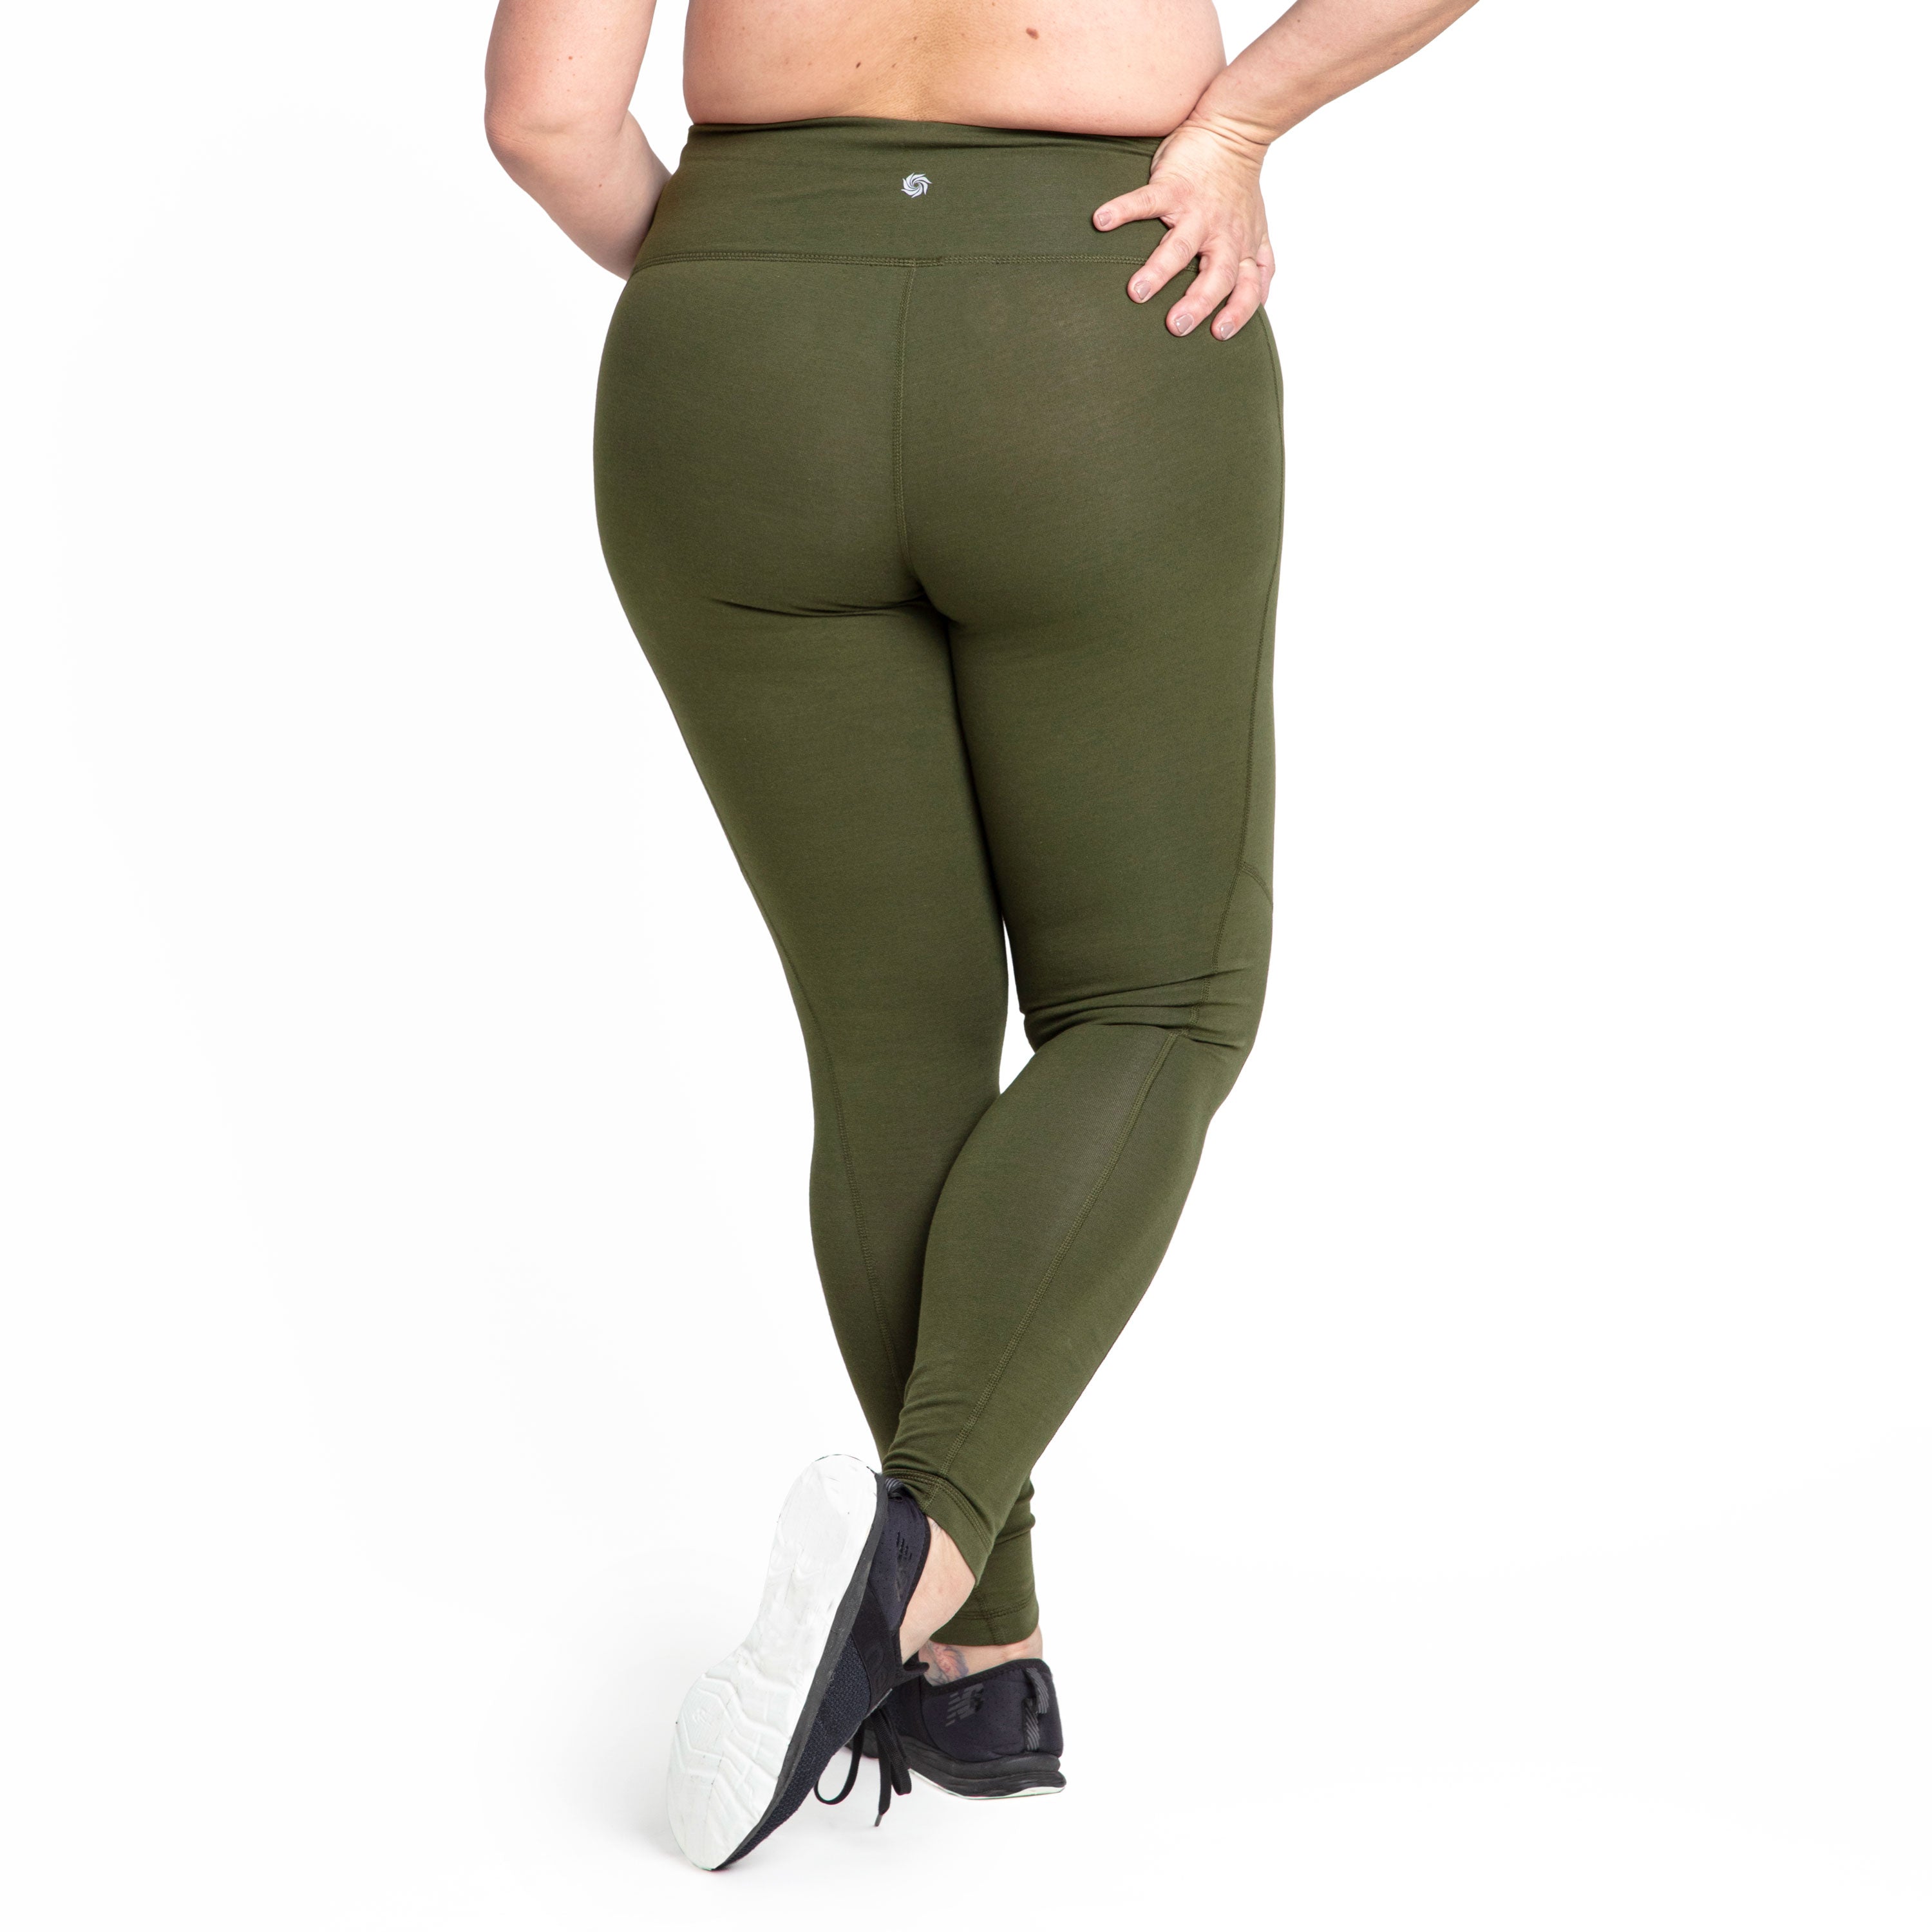 Women's Plus Size High Waisted Cotton Compression Leggings.  (7307982)